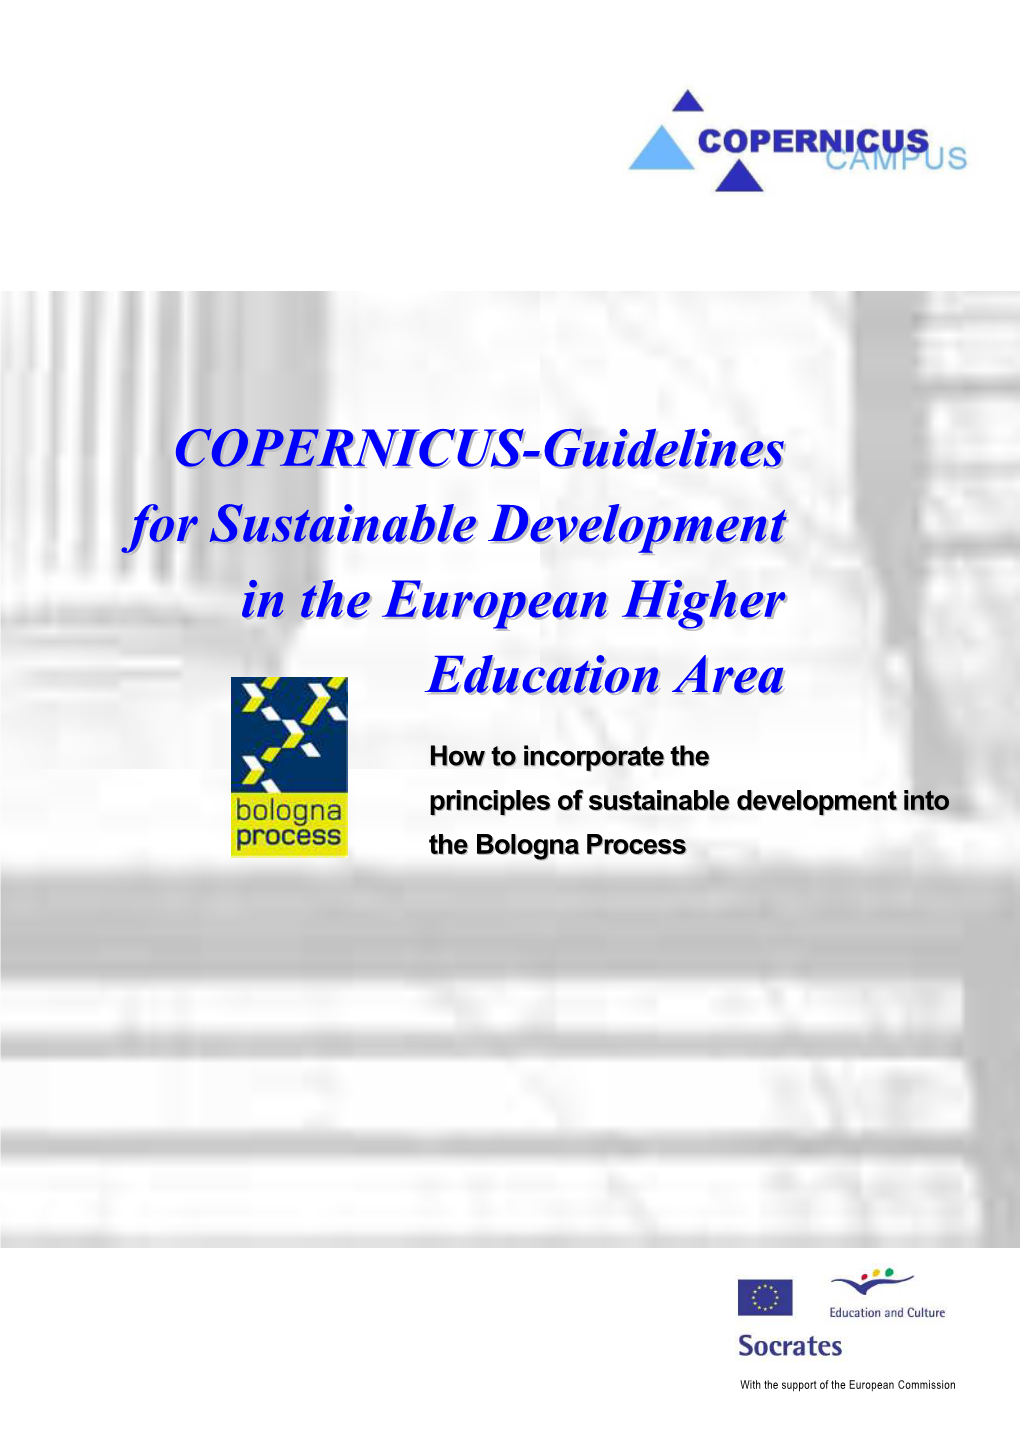 COPERNICUS-Guidelines for Sustainable Development in The